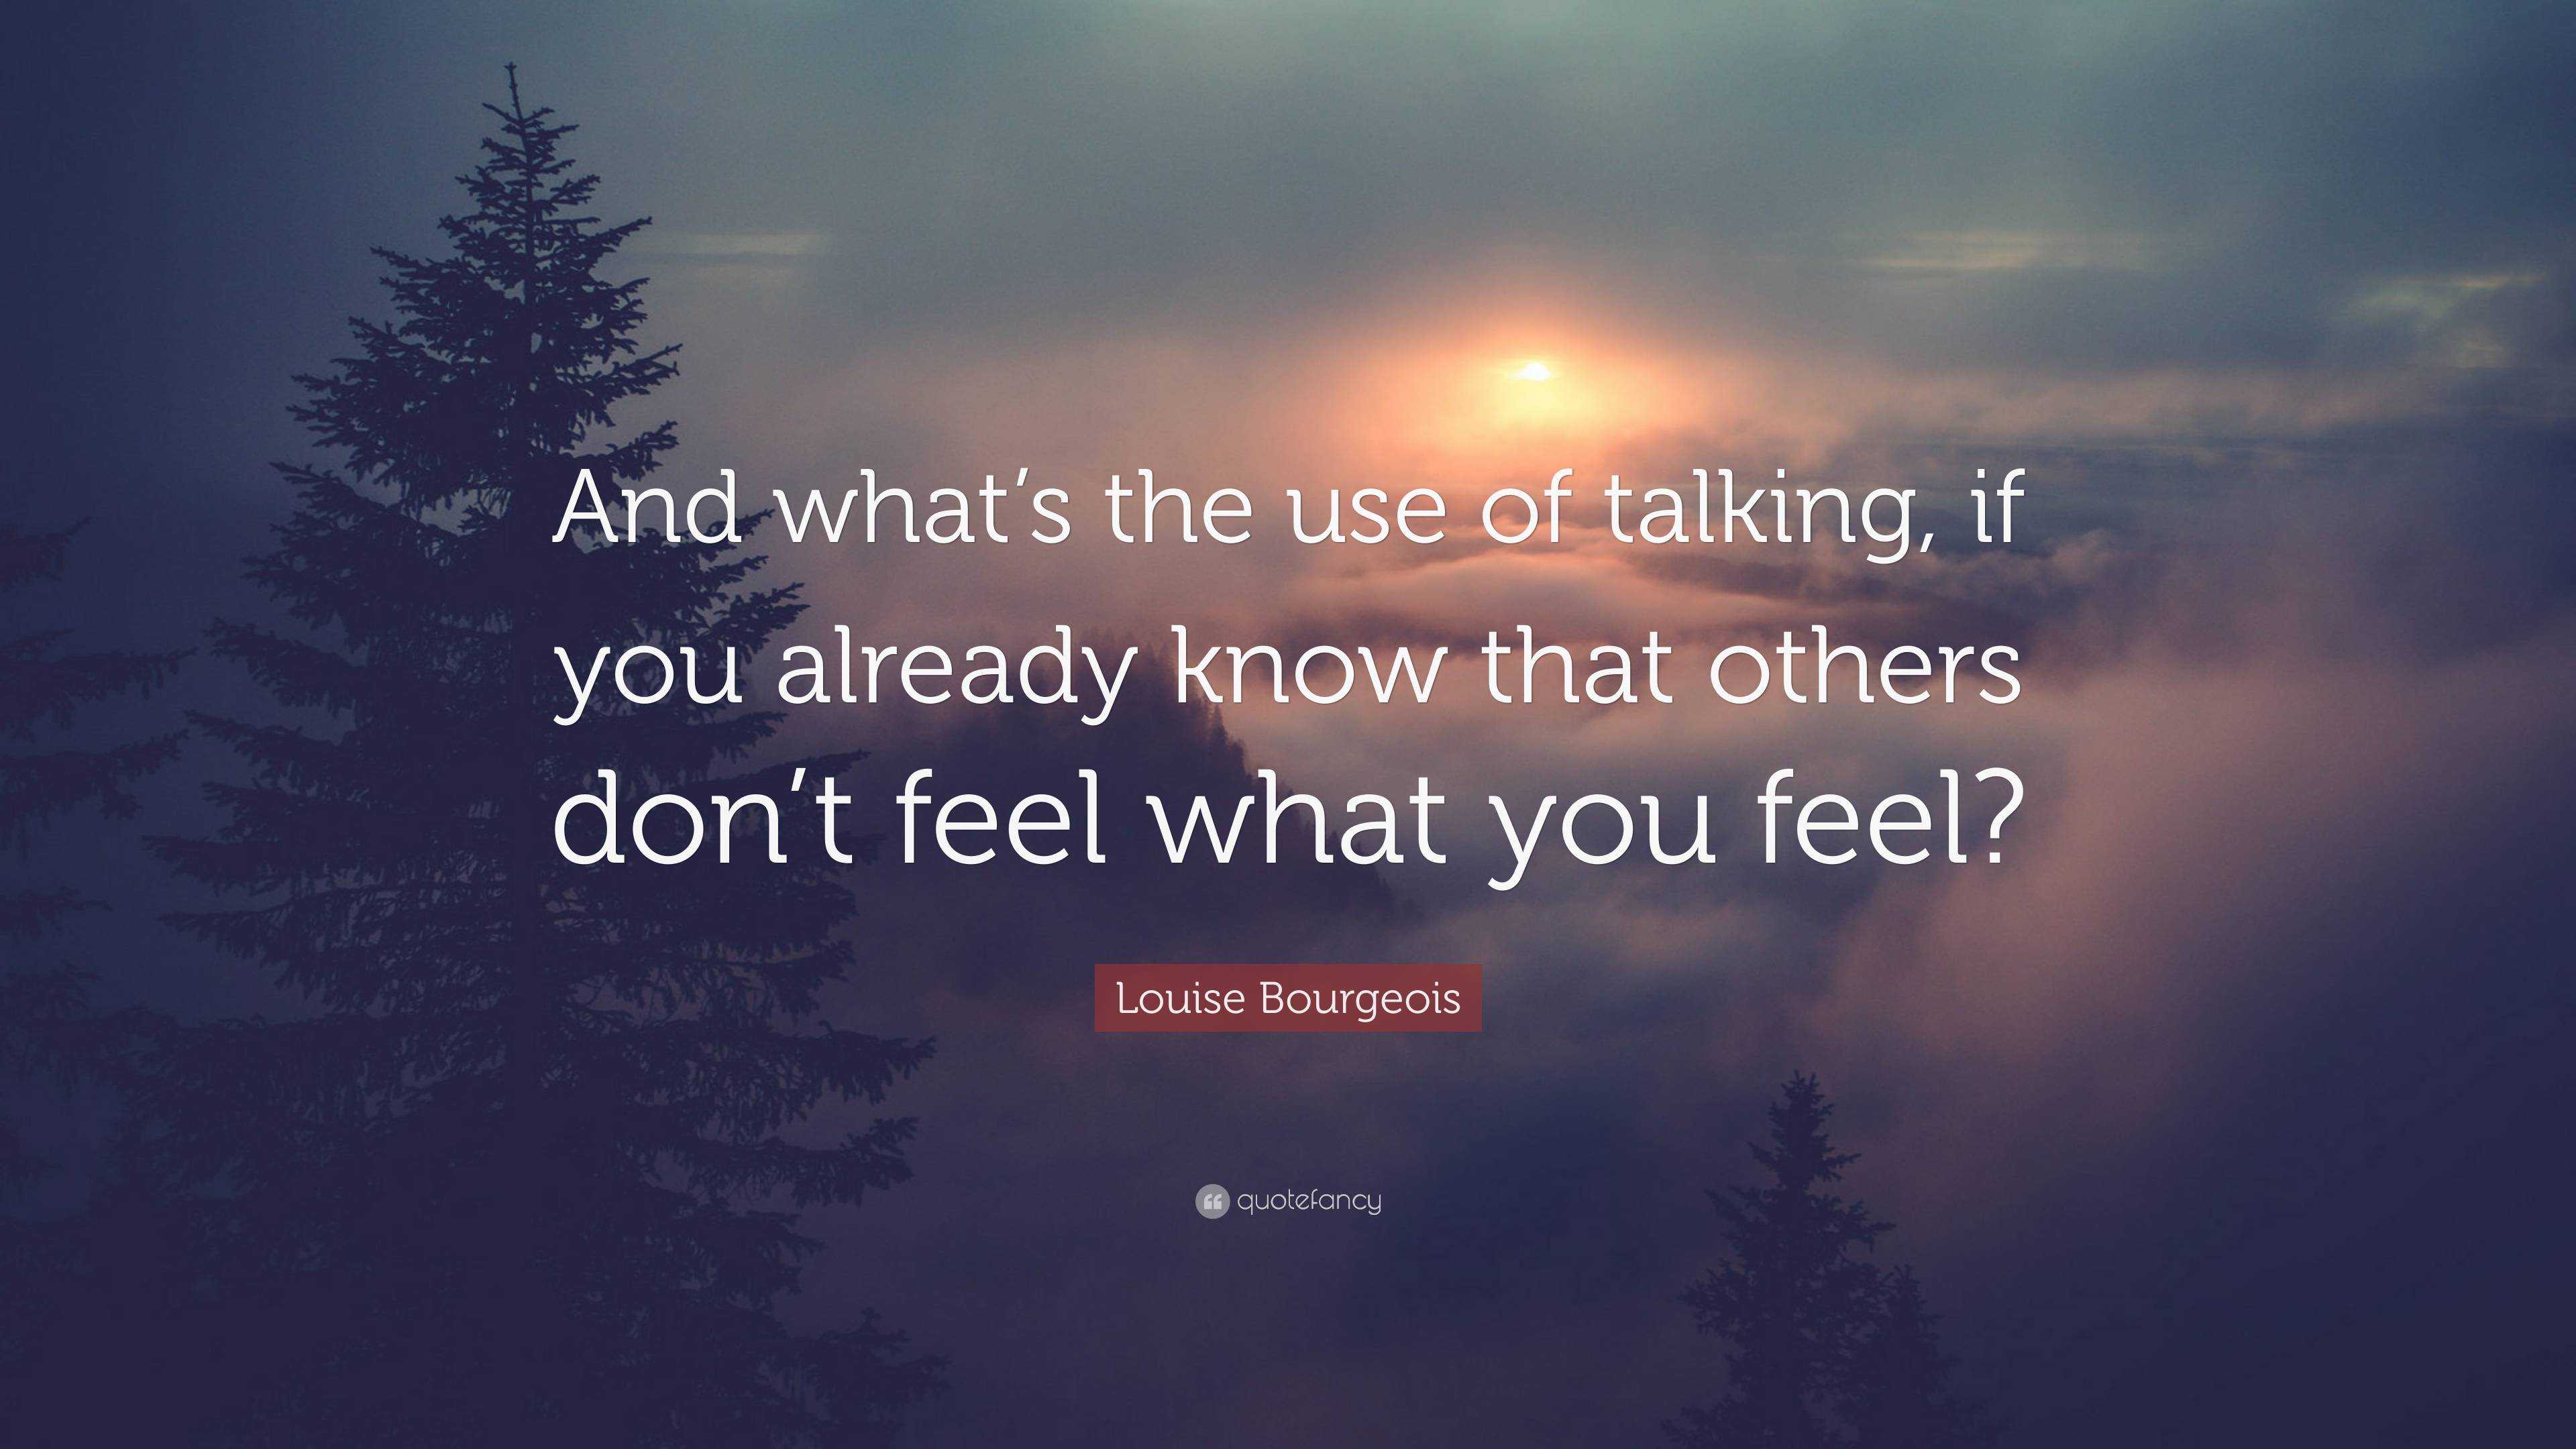 Louise Bourgeois Quote: “And what’s the use of talking, if you already ...